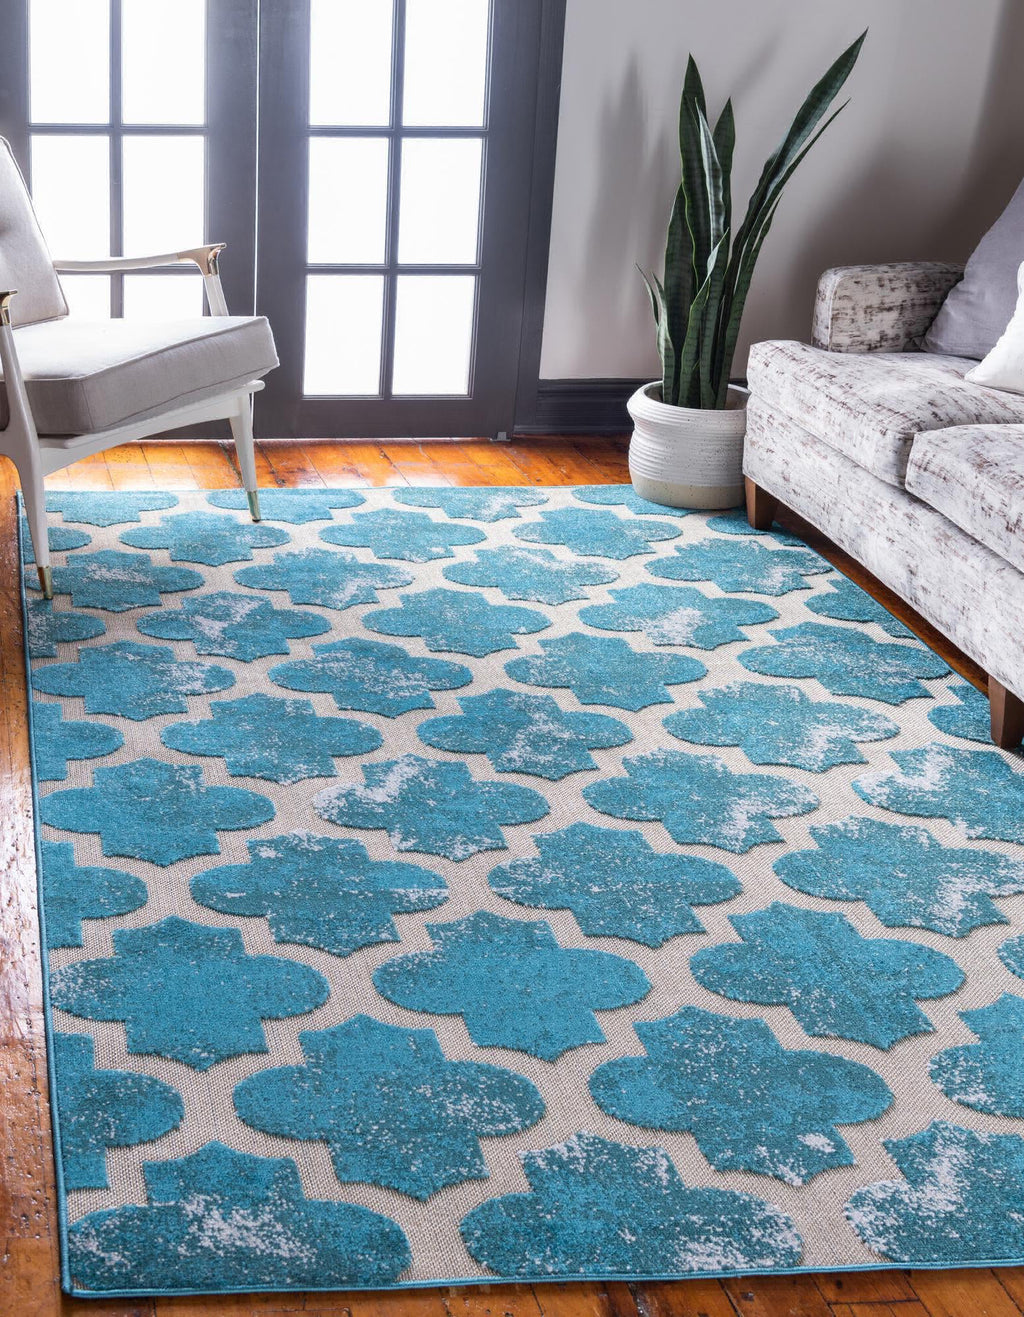 Unique Loom Outdoor Trellis T-AHENK-LAGOS-F011A Turquoise Area Rug Rectangle Lifestyle Image Feature